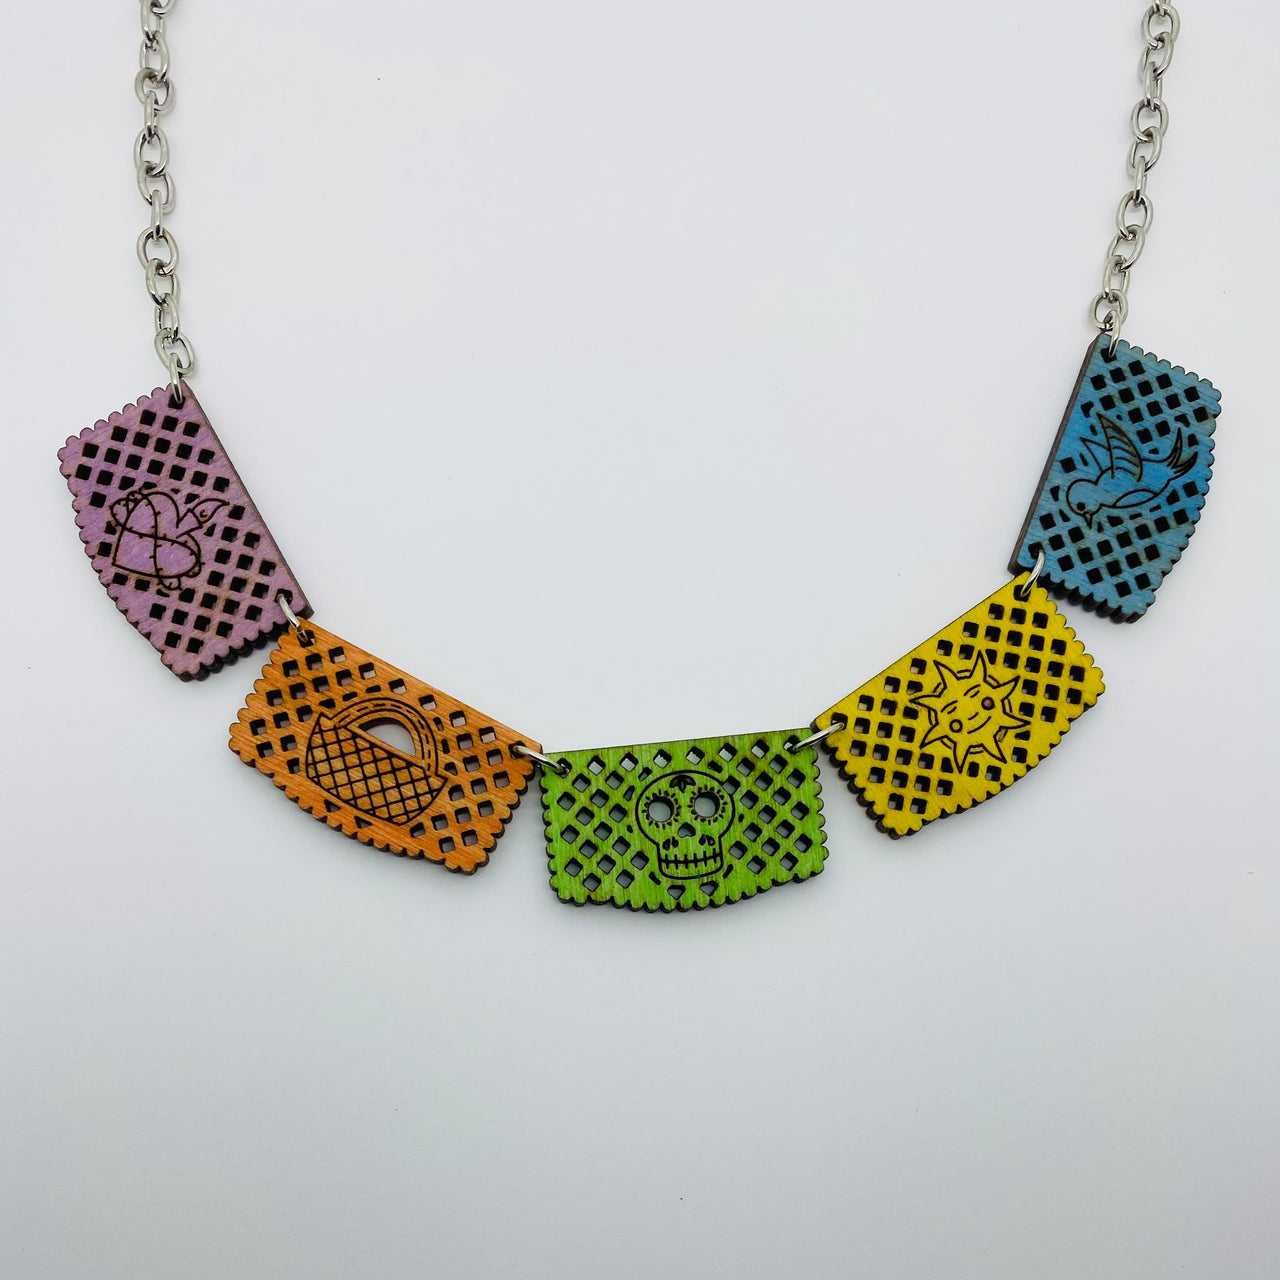 Wooden Papel Picado Litewood™ Necklace